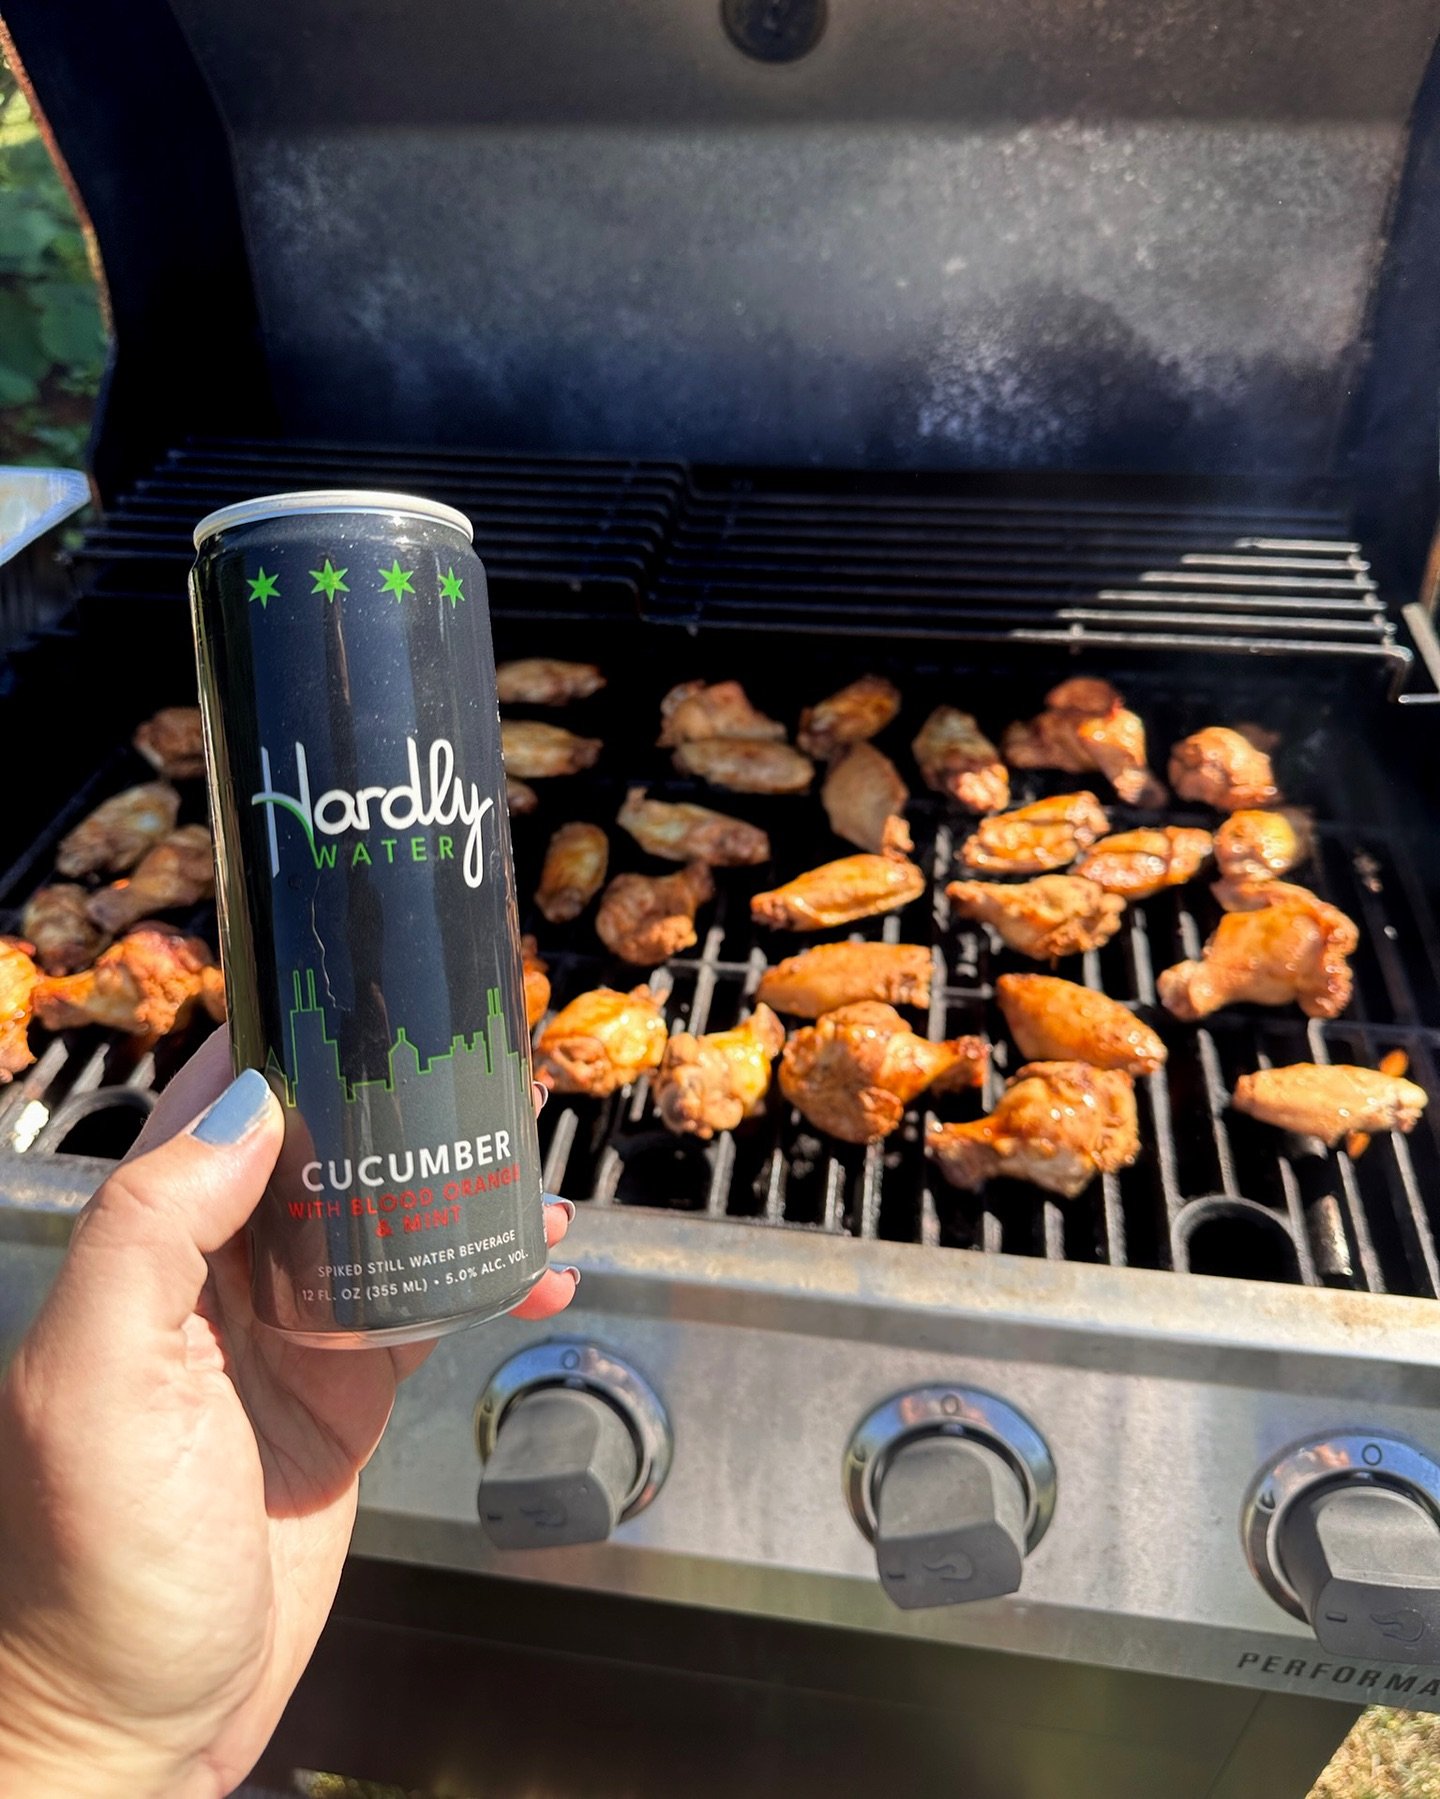 Grill masters, it&rsquo;s your day! Join us in celebrating National BBQ Day with @Hardlywater - the ultimate secret ingredient and flavor sidekick! 😉🍗

#nationalbbqday #grillandchill #hardlywater #chicagobeverage #grillm&aacute;ster #notaseltzer